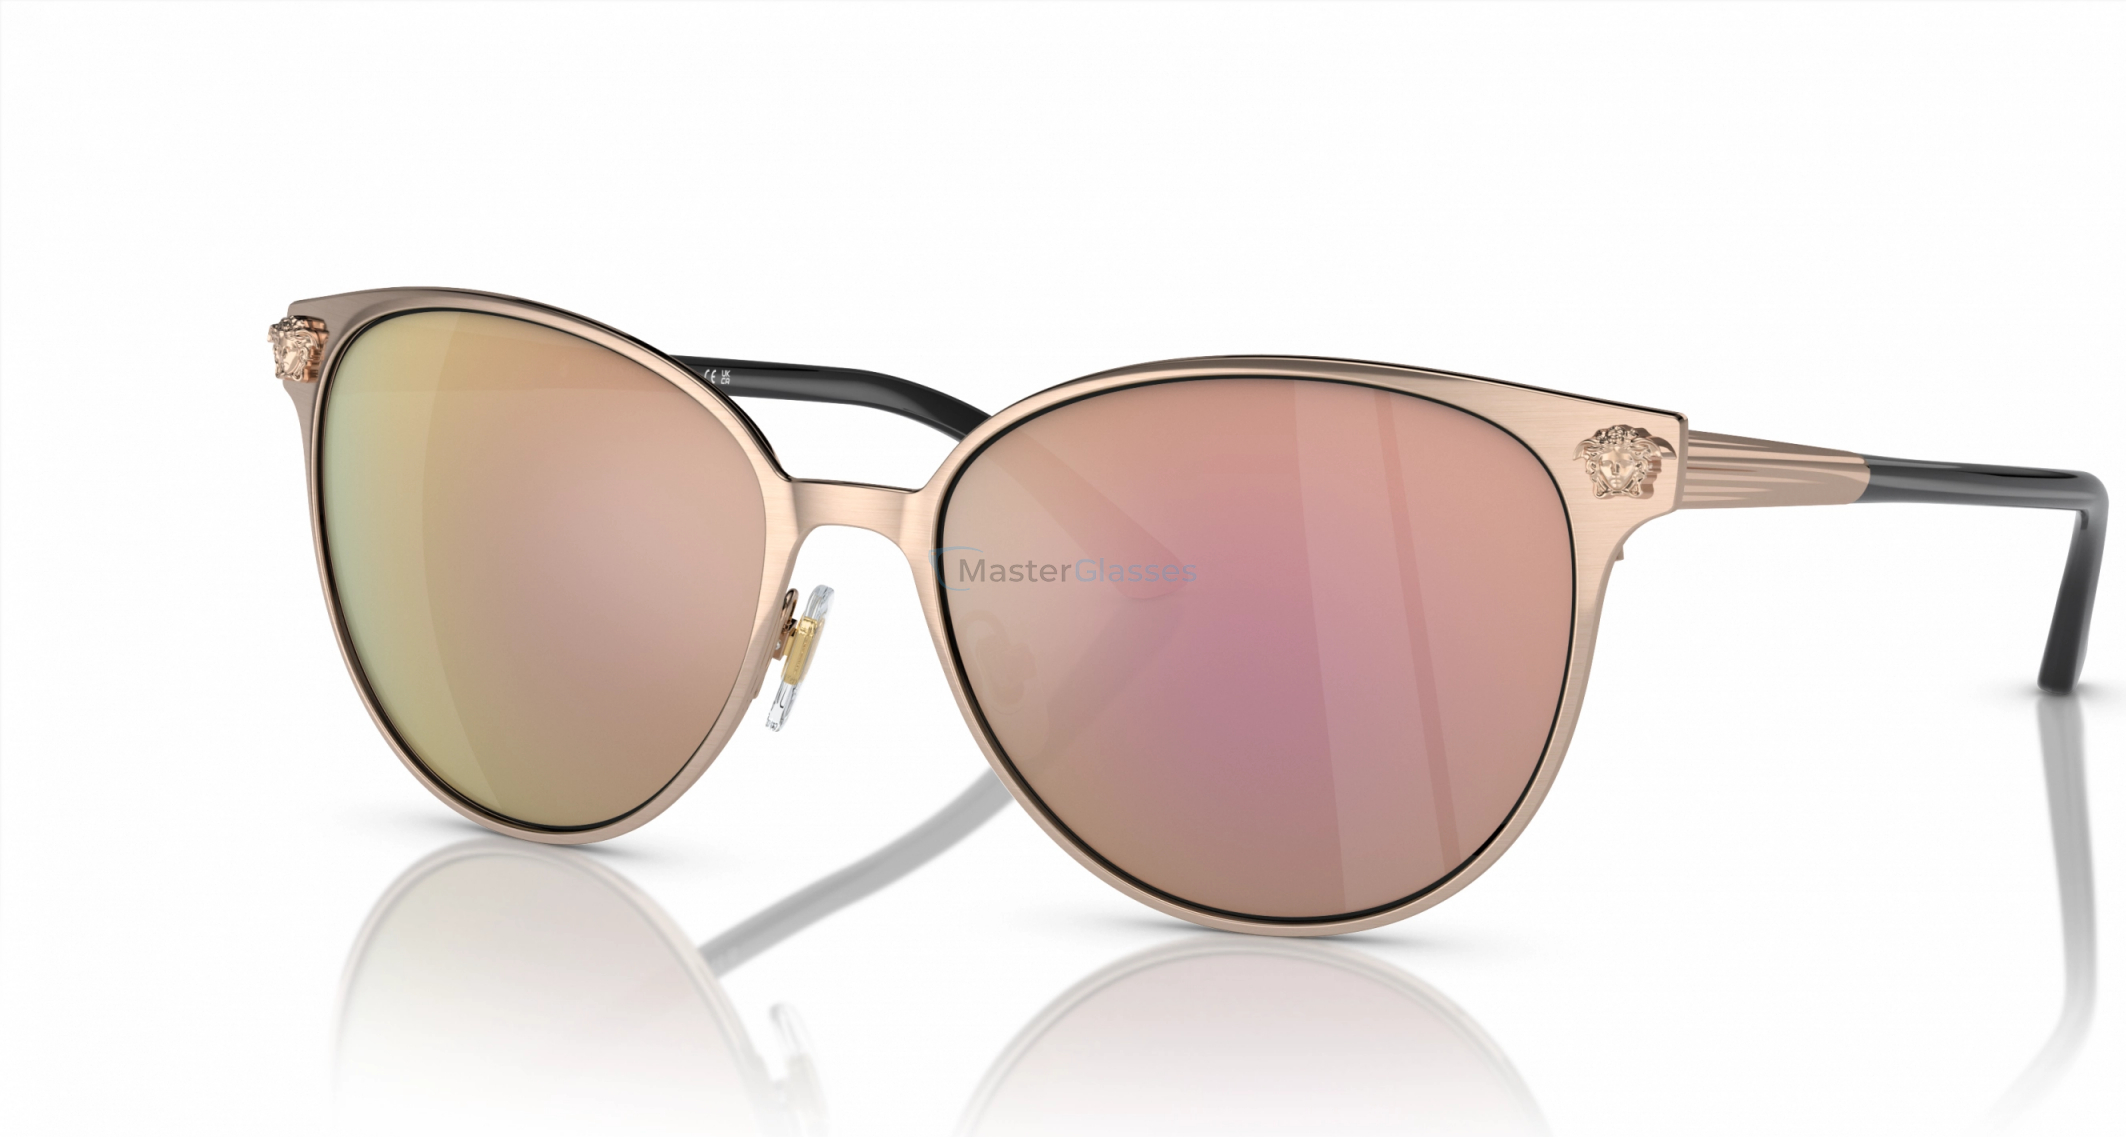   Versace VE2168 14095R Pink Gold